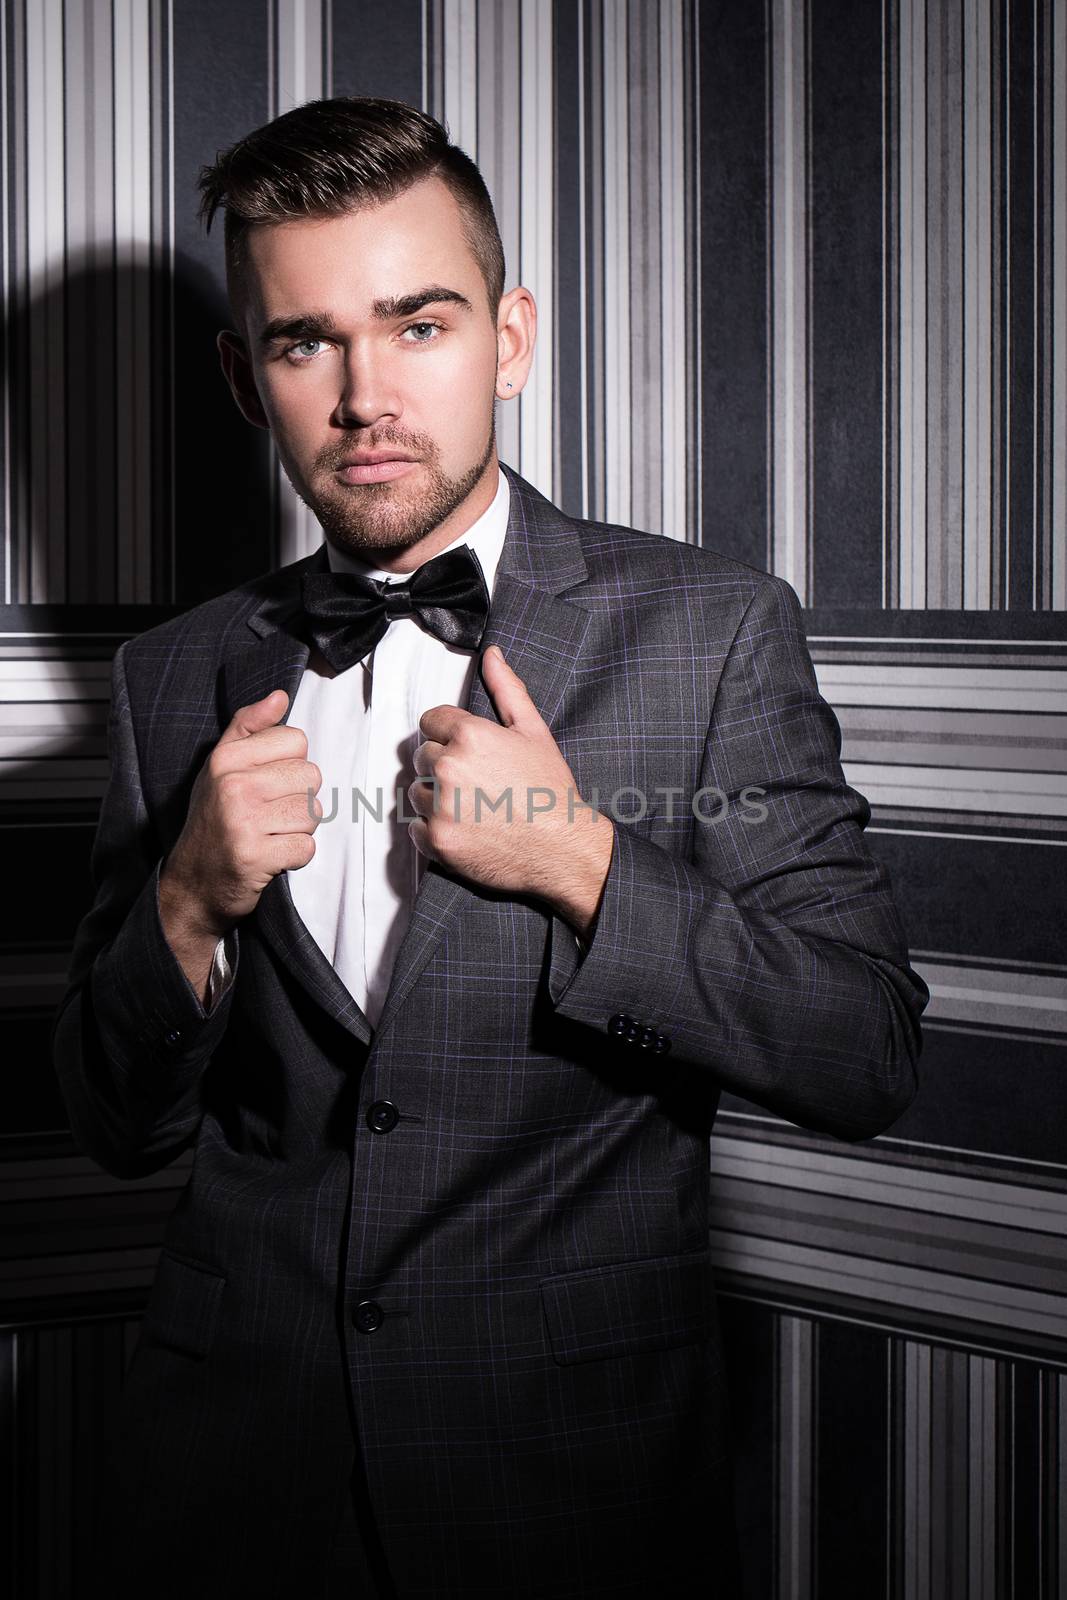 Portrait of a handsome man in a suit and a tie who is posing over a striped background